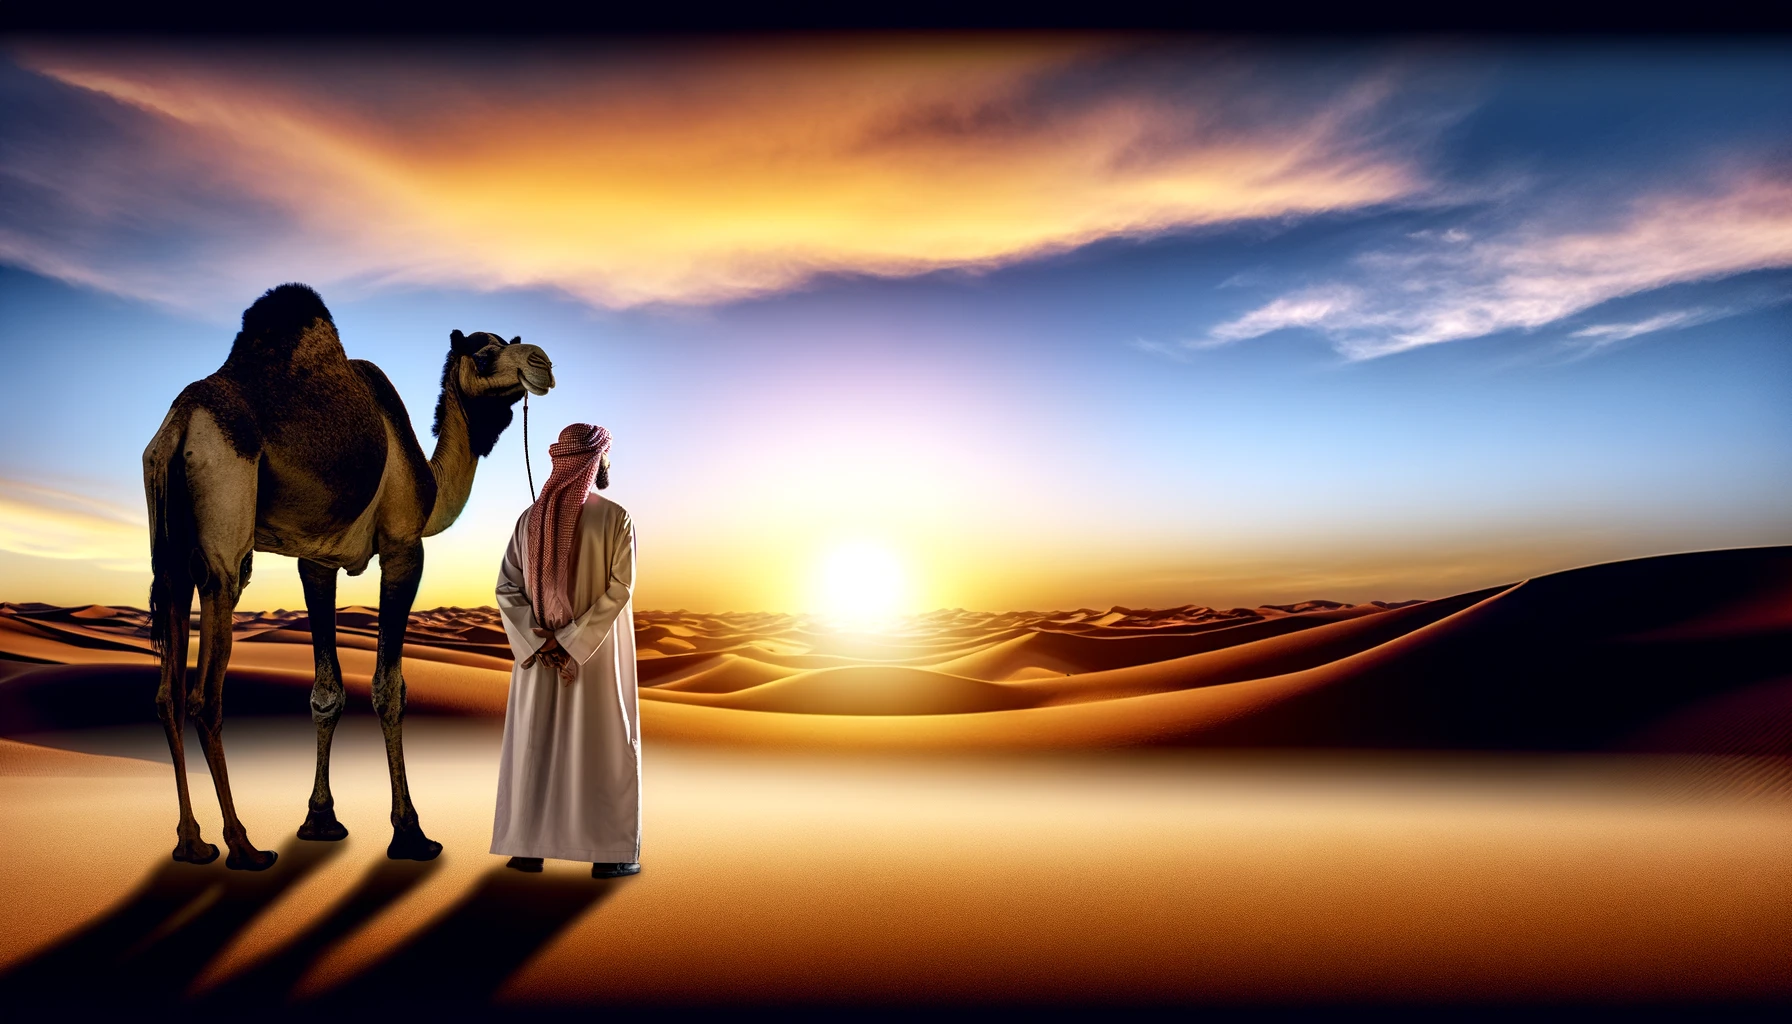 -A-realistic-photo-like-image-featuring-a-Bedouin-standing-with-his-back-to-the-camera-looking-at-the-setting-sun-with-a-camel-standing-beside-him